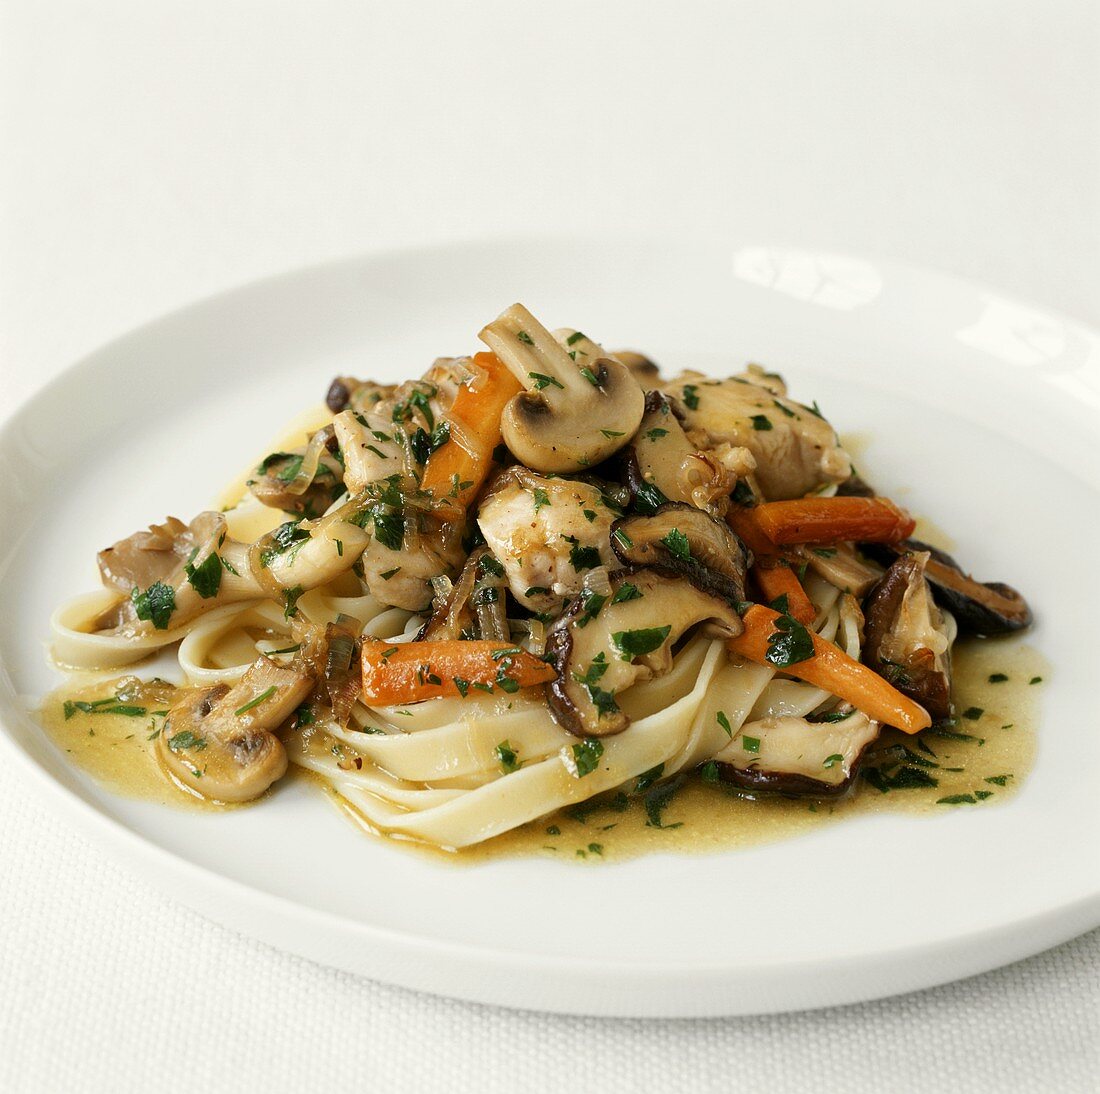 Ribbon pasta with chicken and mushroom ragout